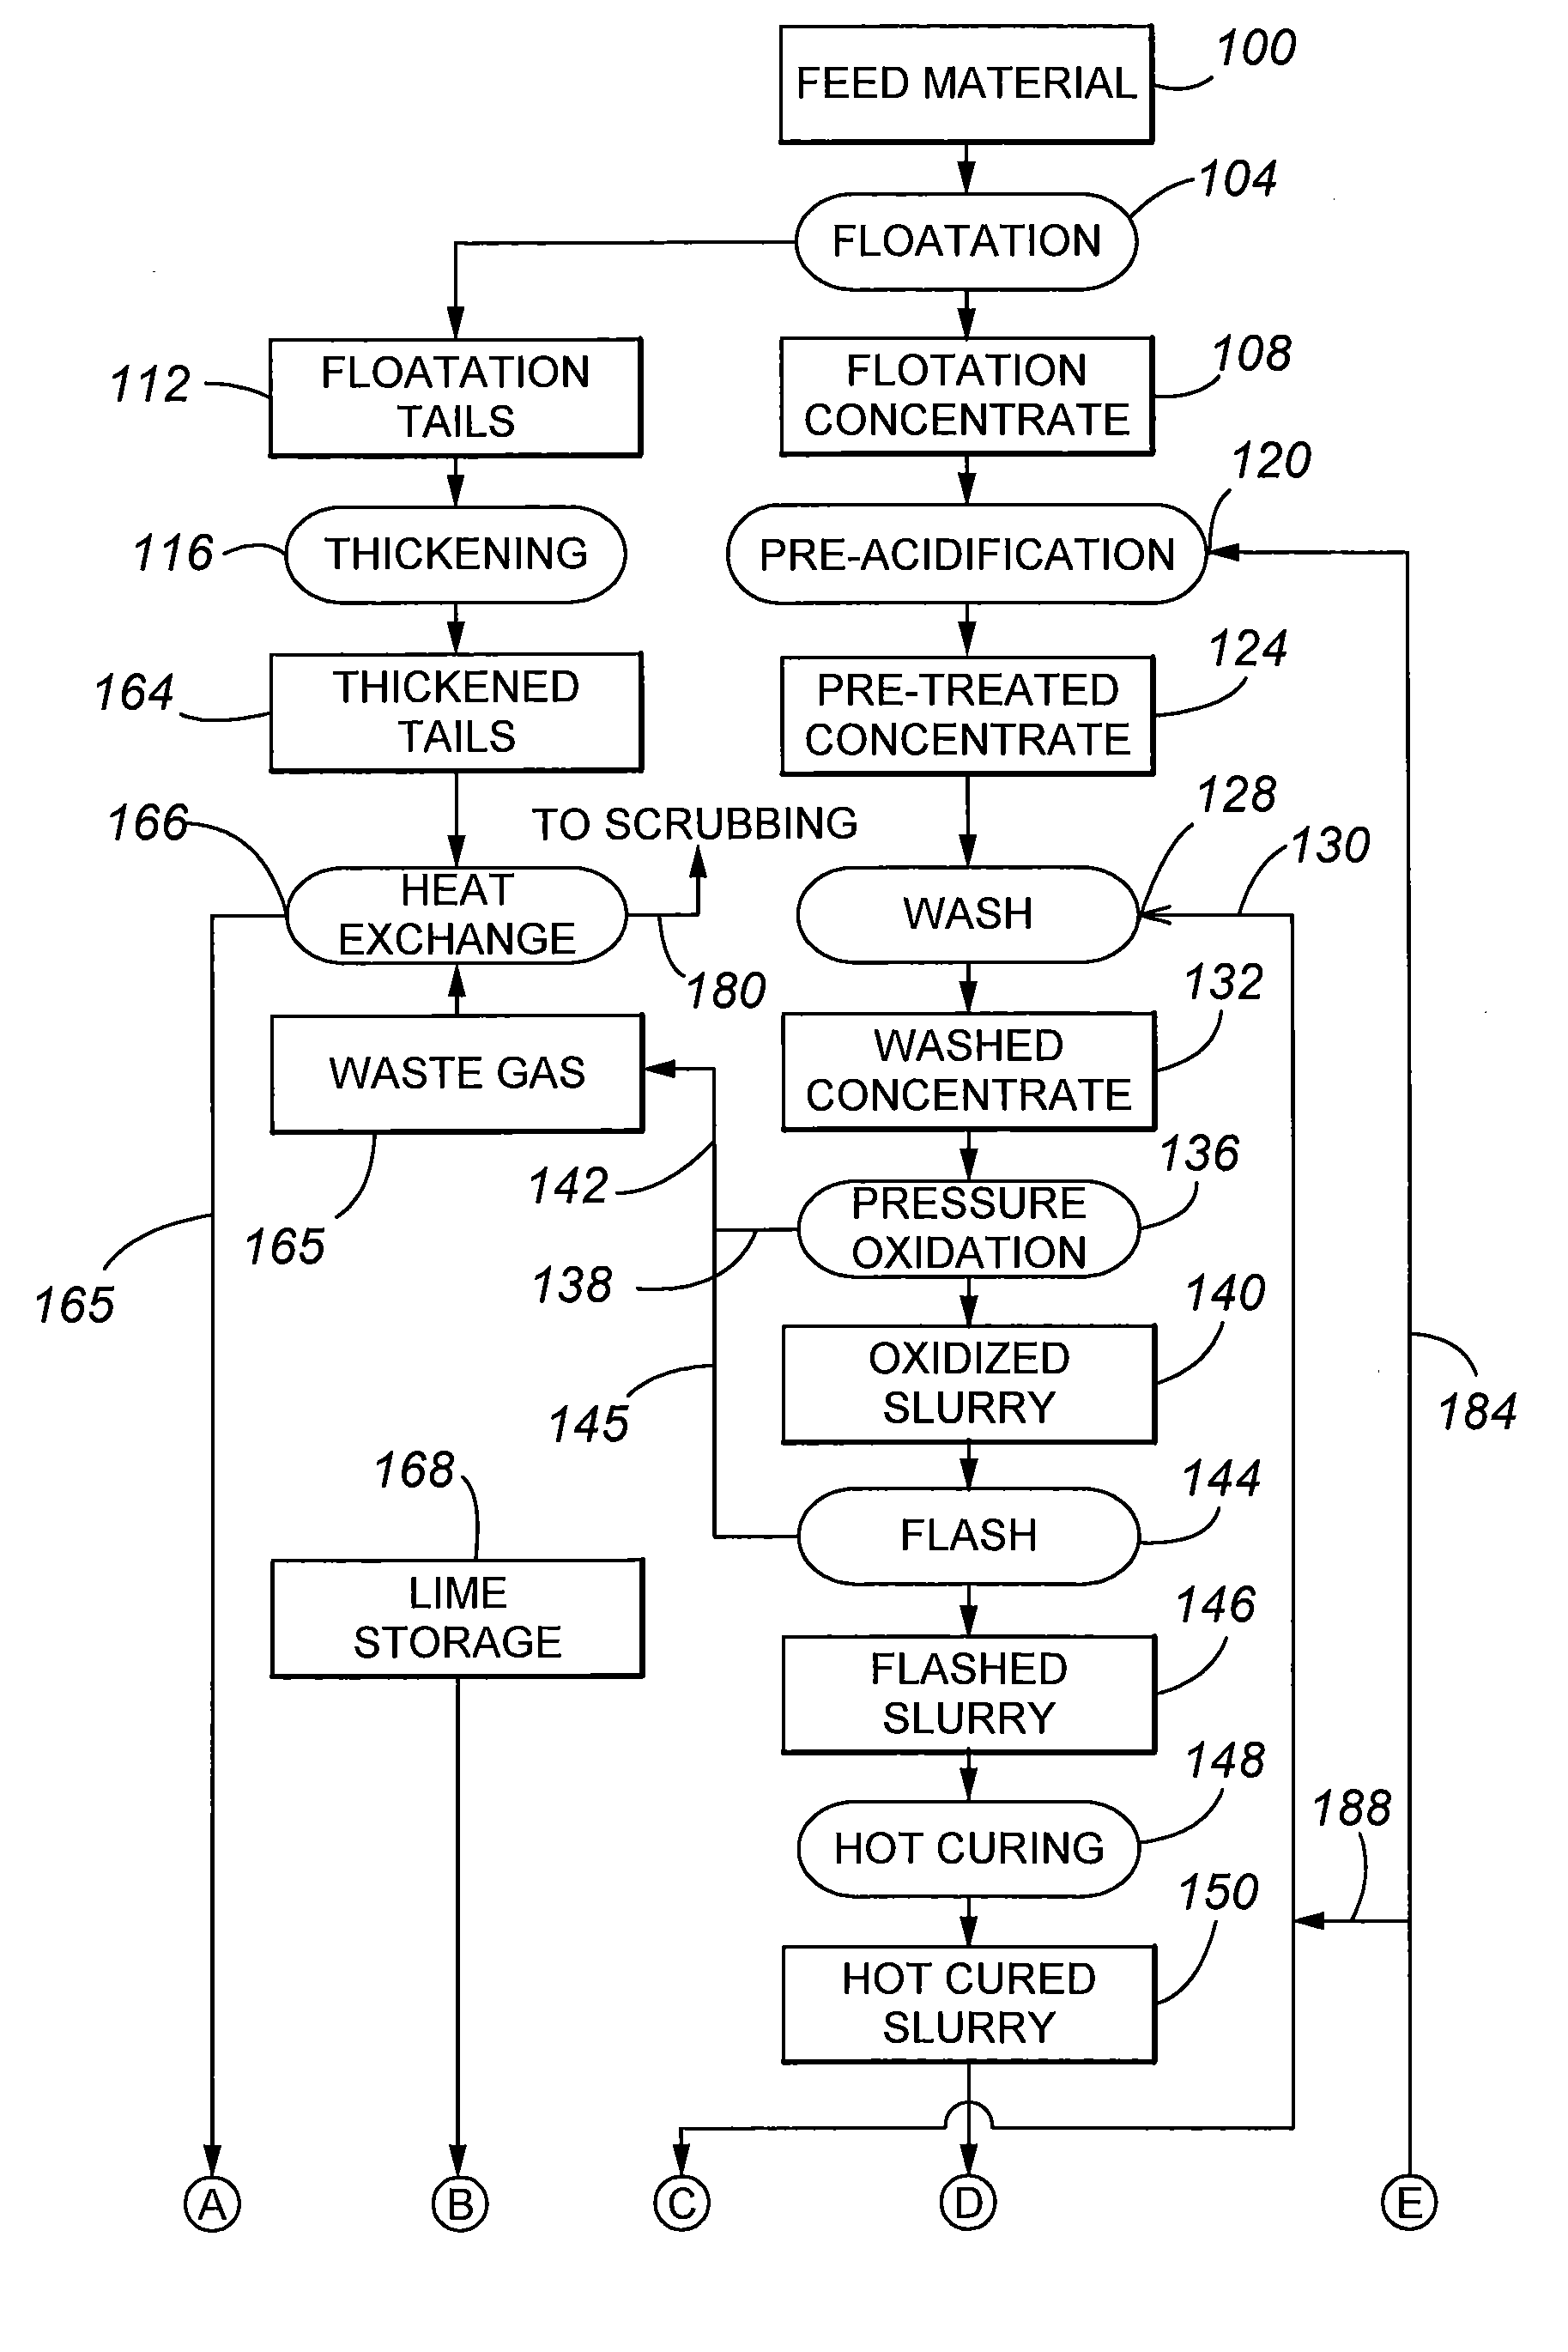 Process for controlling acid in sulfide pressure oxidation processes